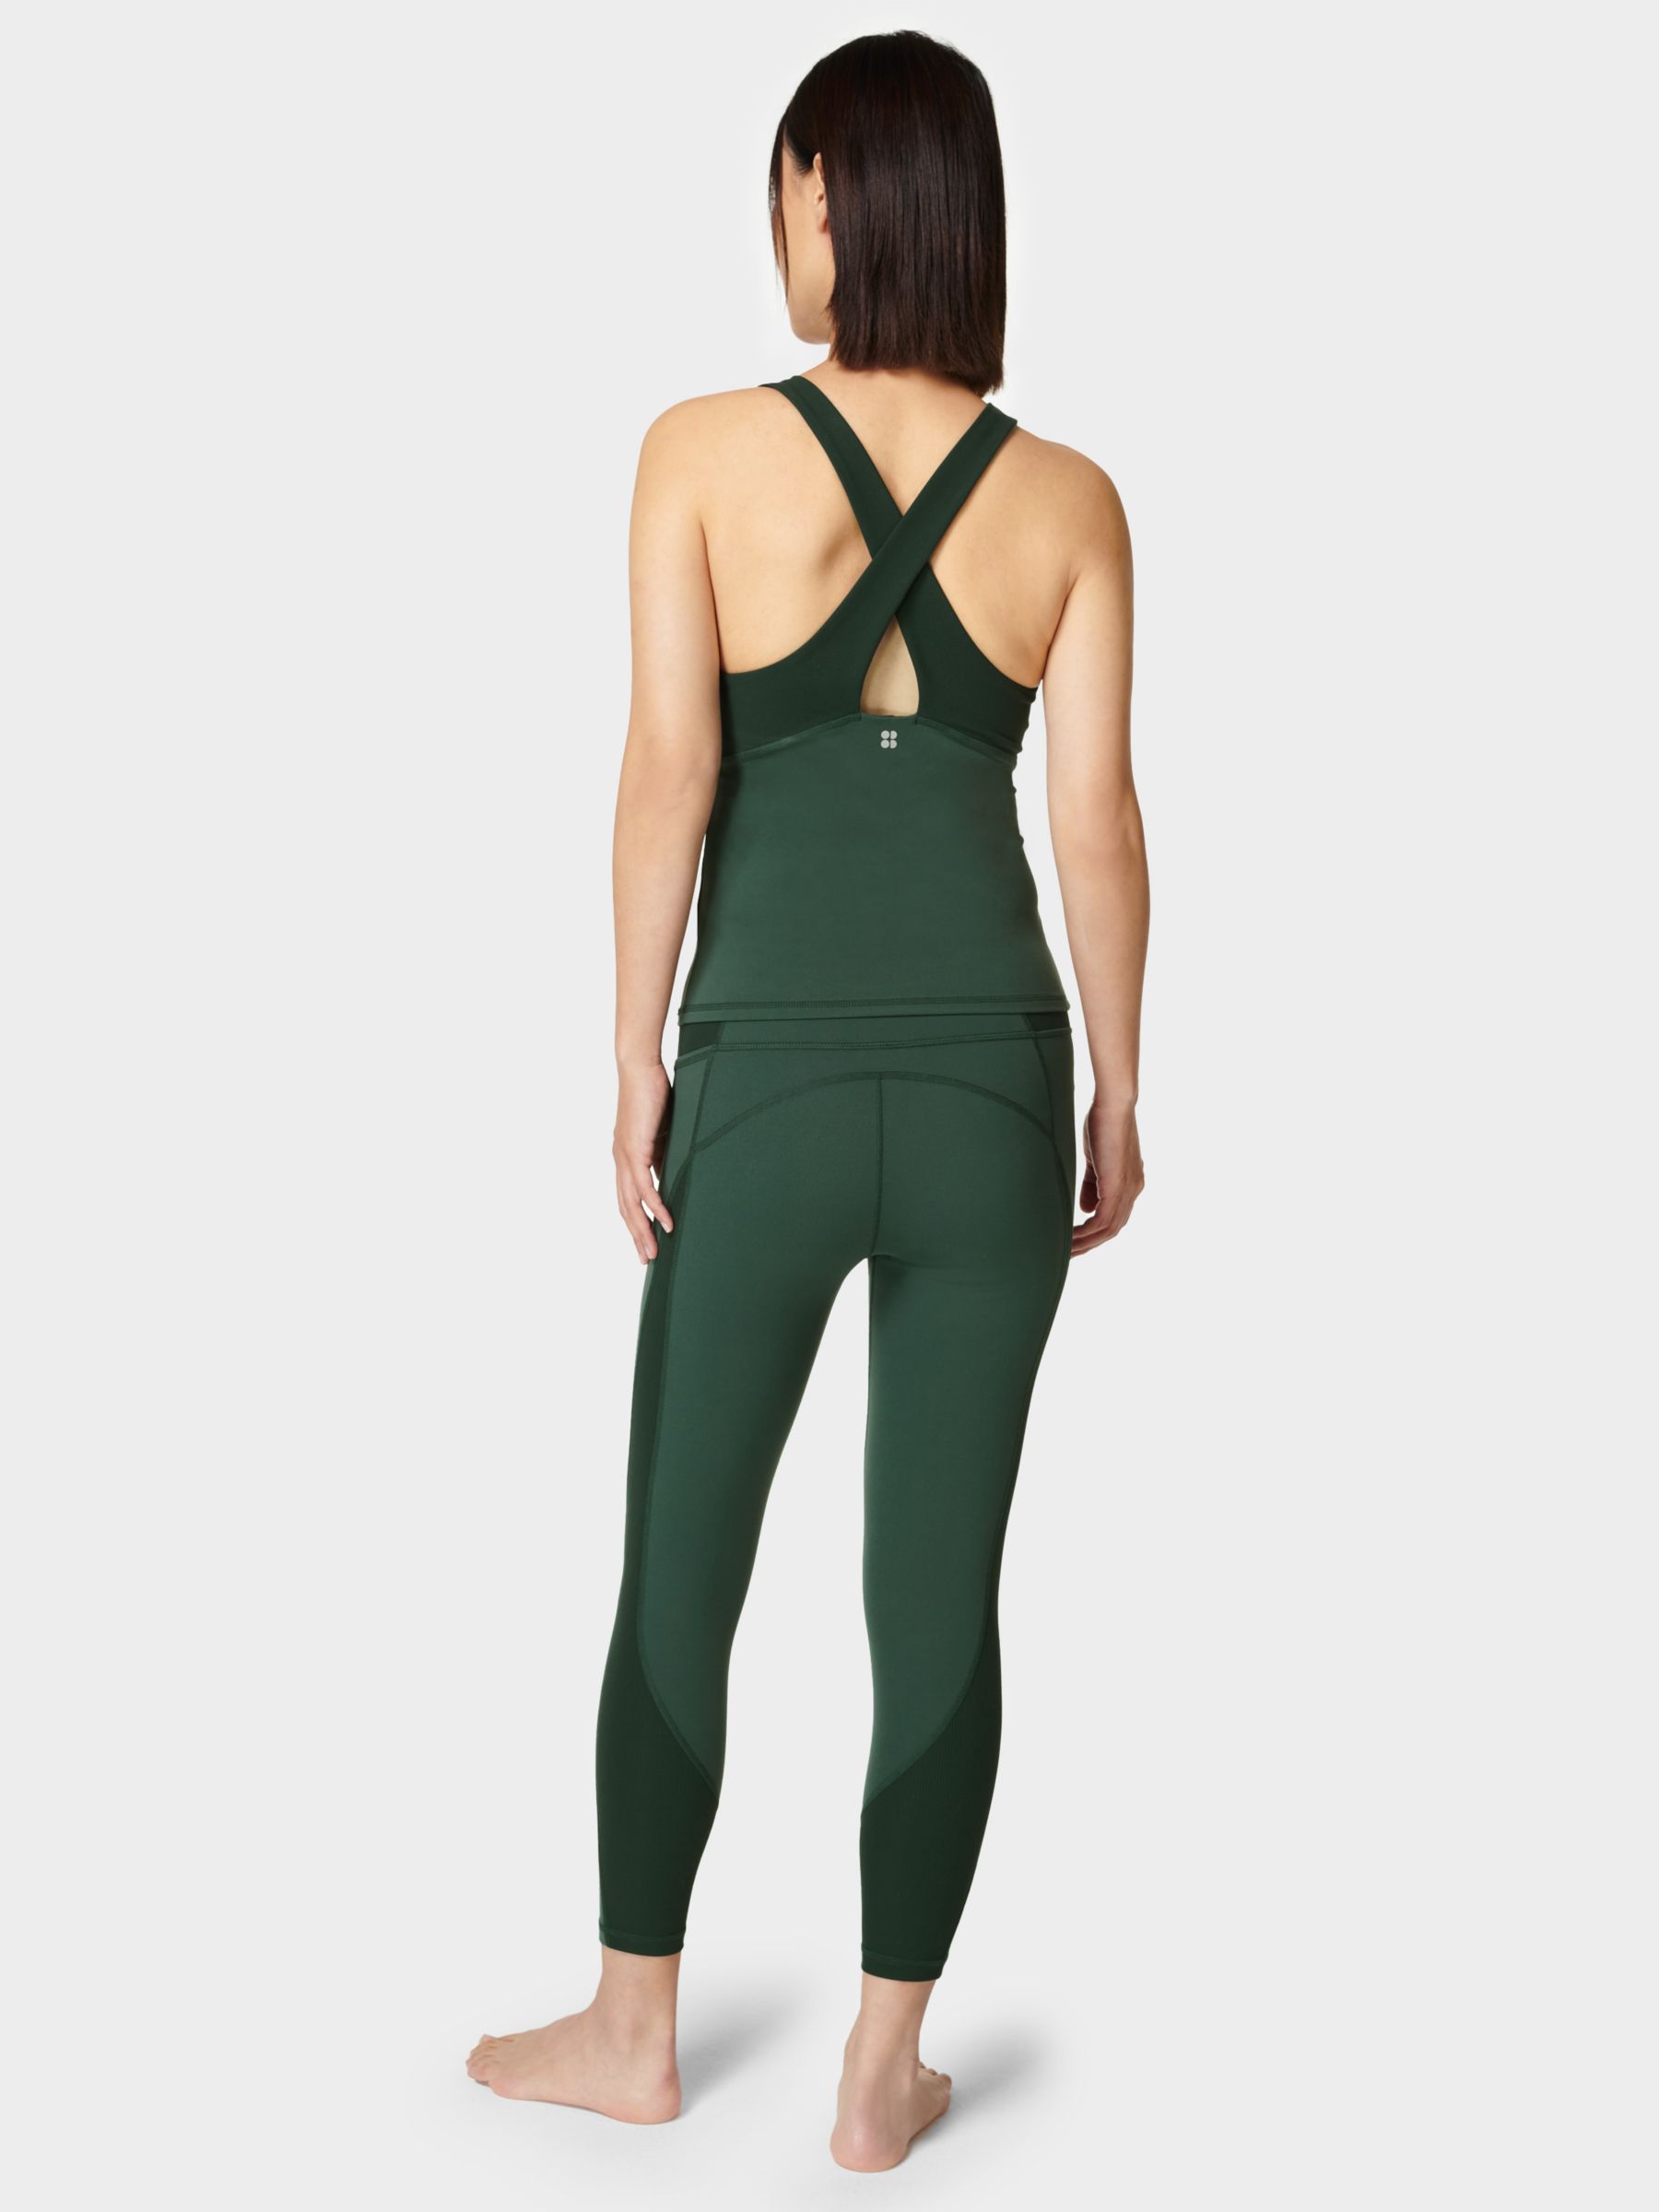 SPANX Women's Cropped Look at Me Now Seamless Leggings, Sage Camo, Green,  Print, SM - Regular 20 at  Women's Clothing store